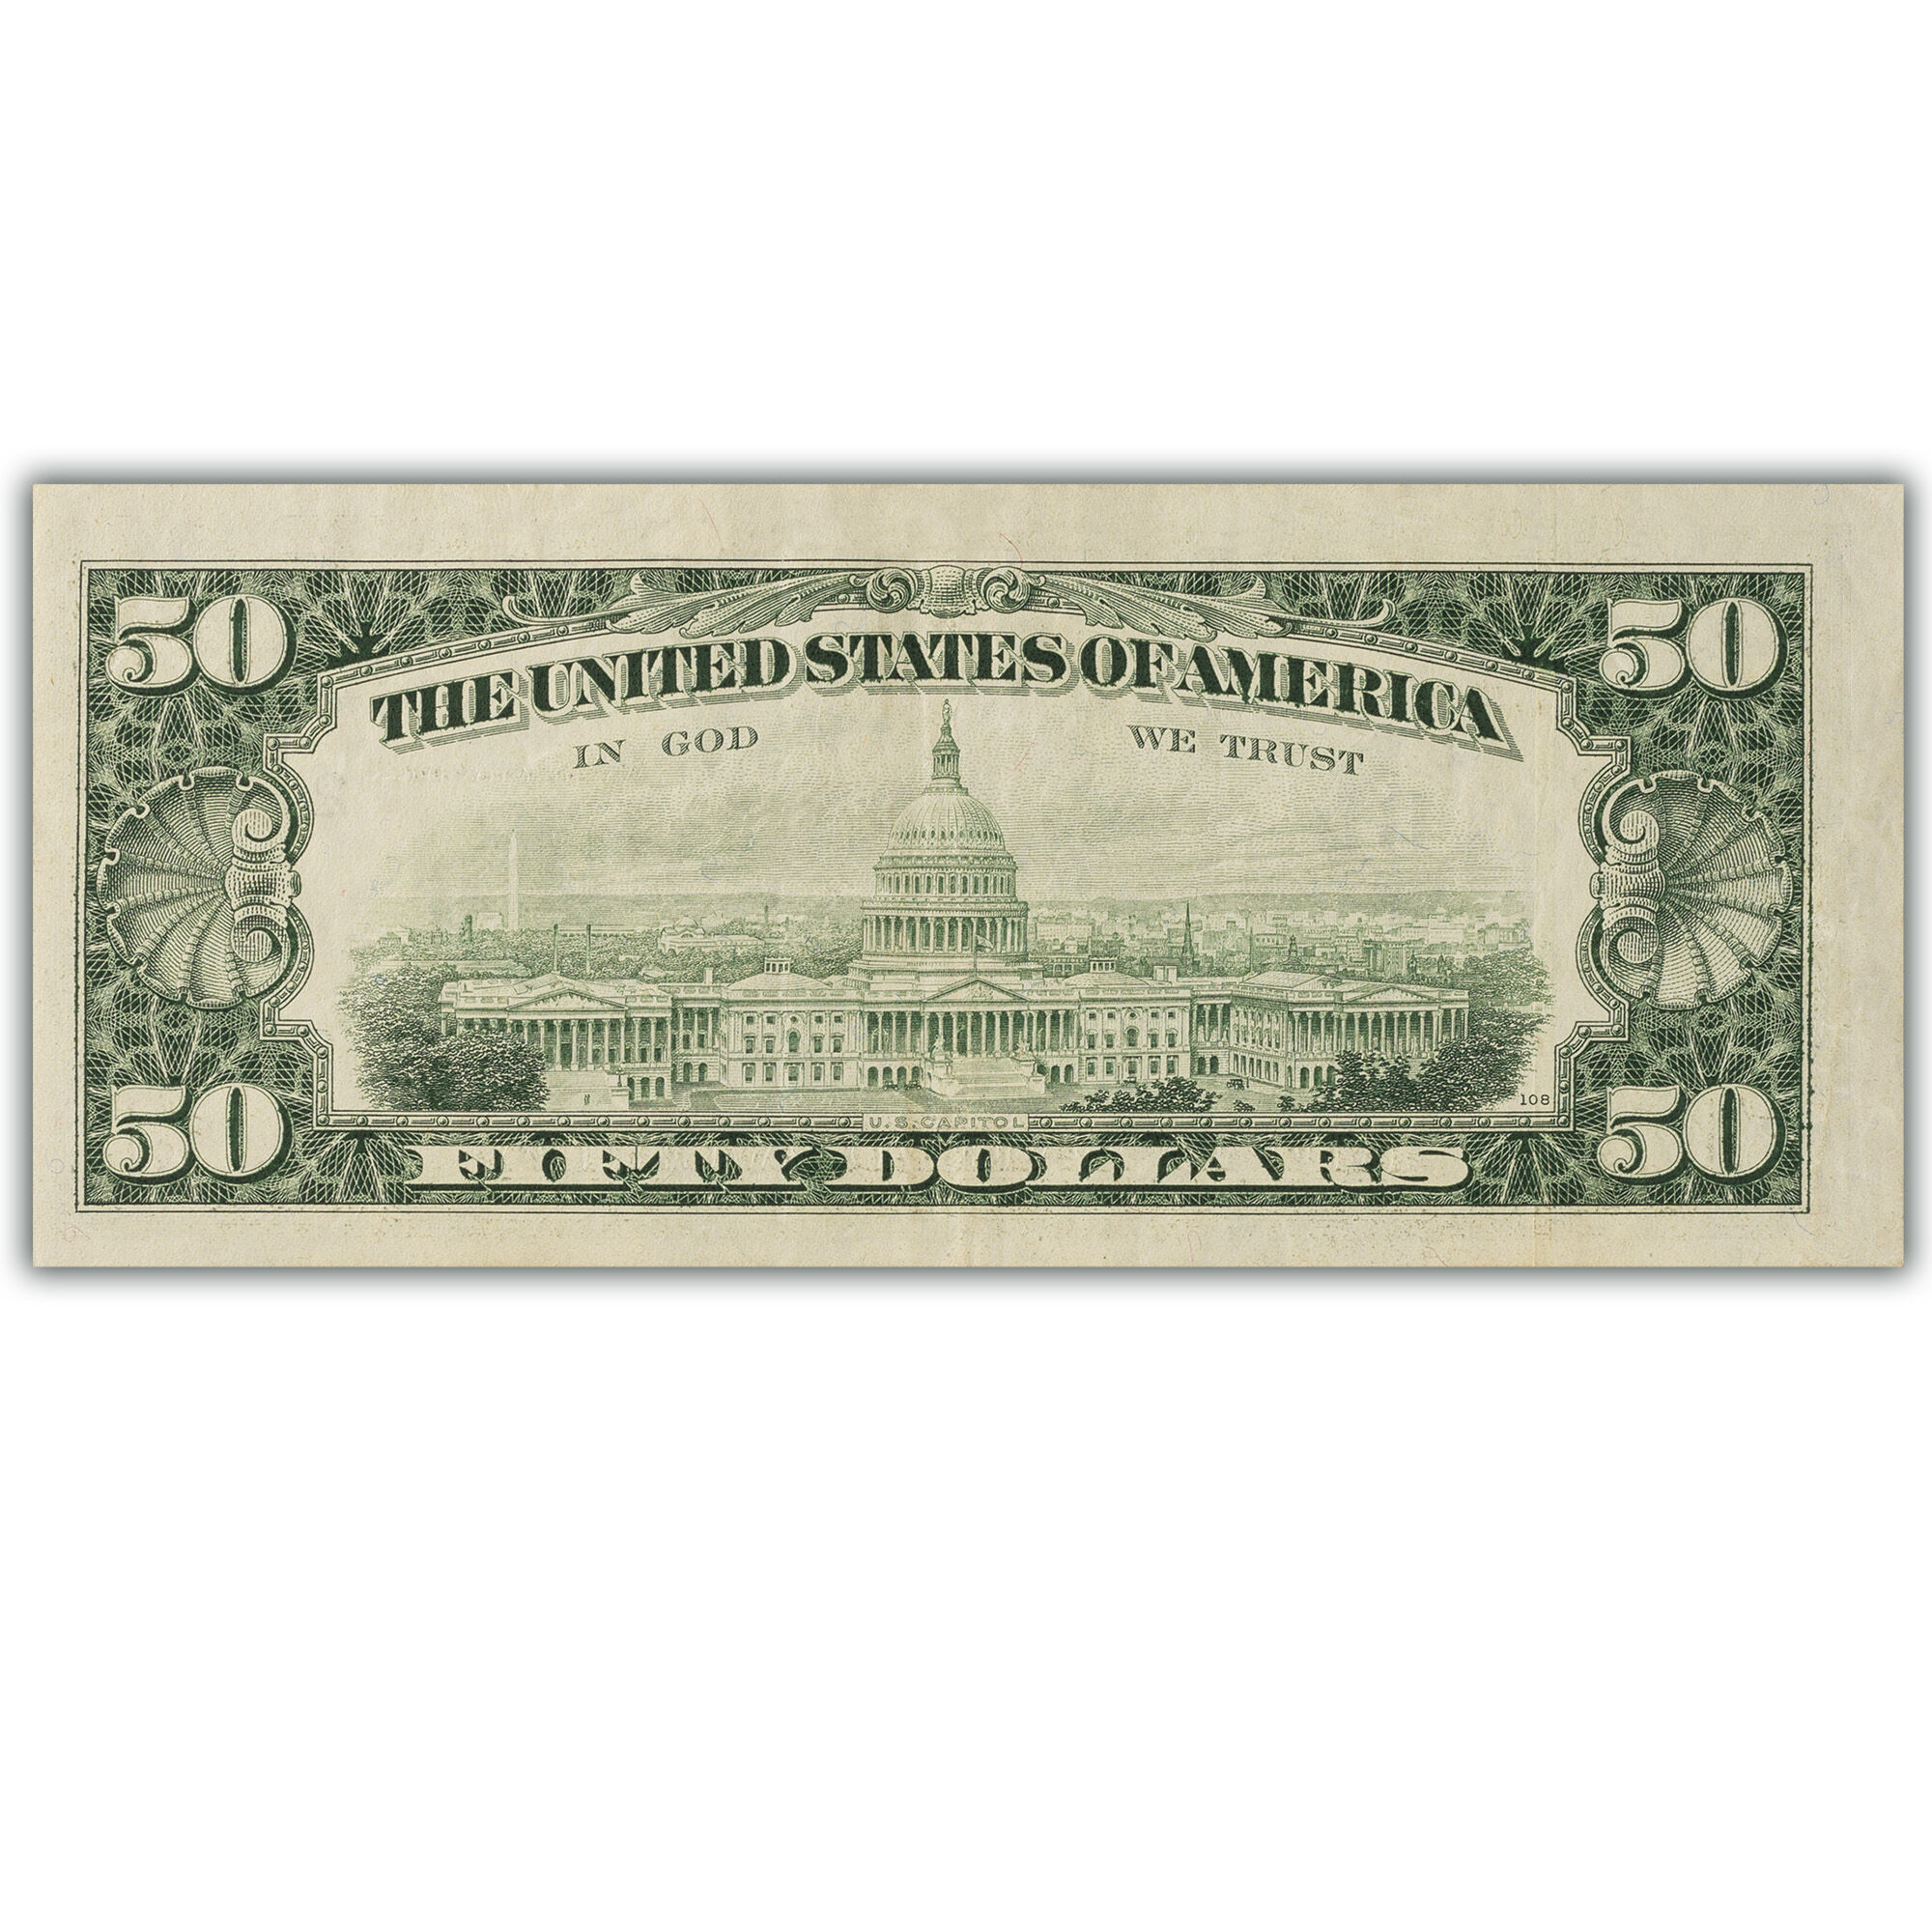 The $50 Federal Reserve Star Note